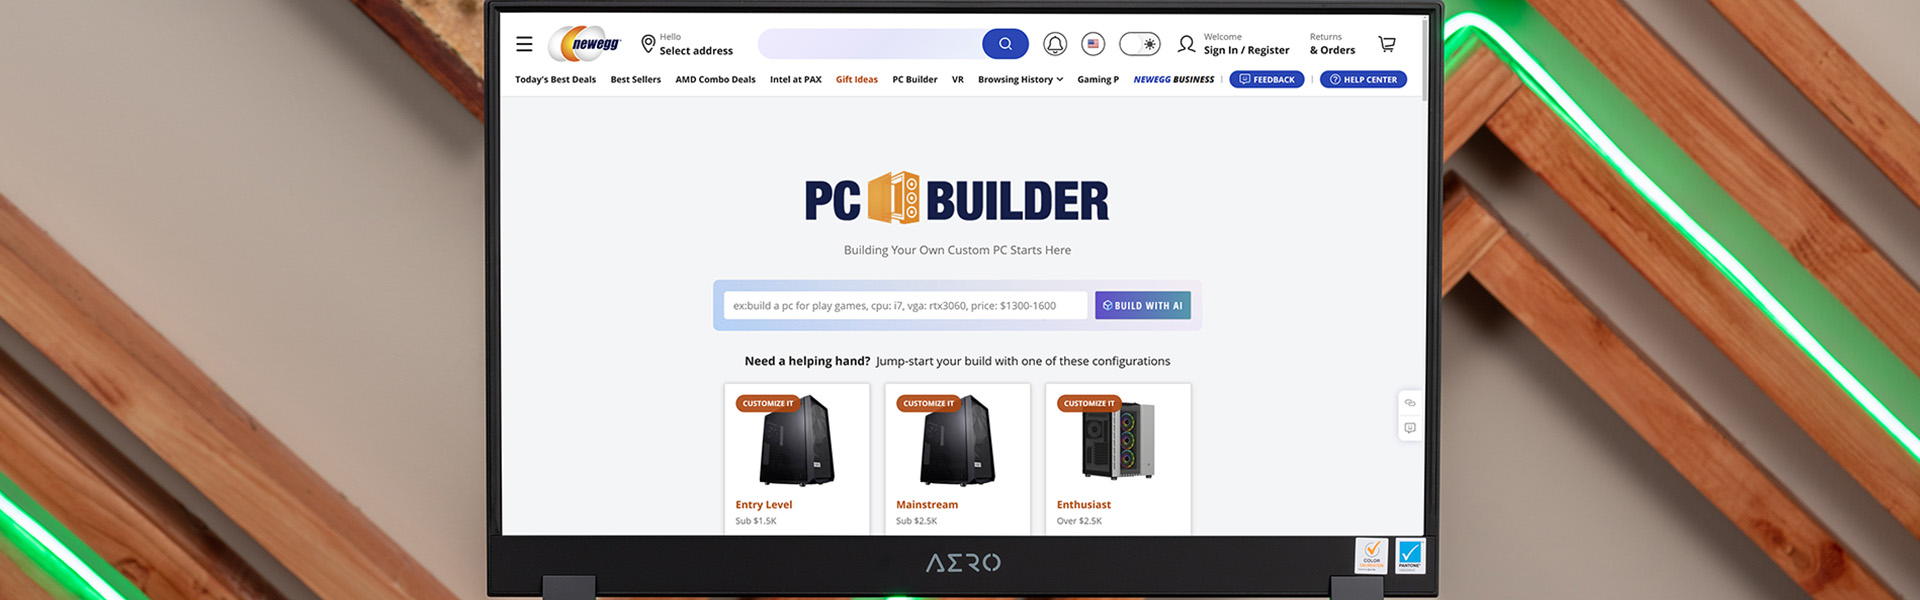 Newegg Uses ChatGPT to Improve Online Shopping Experience